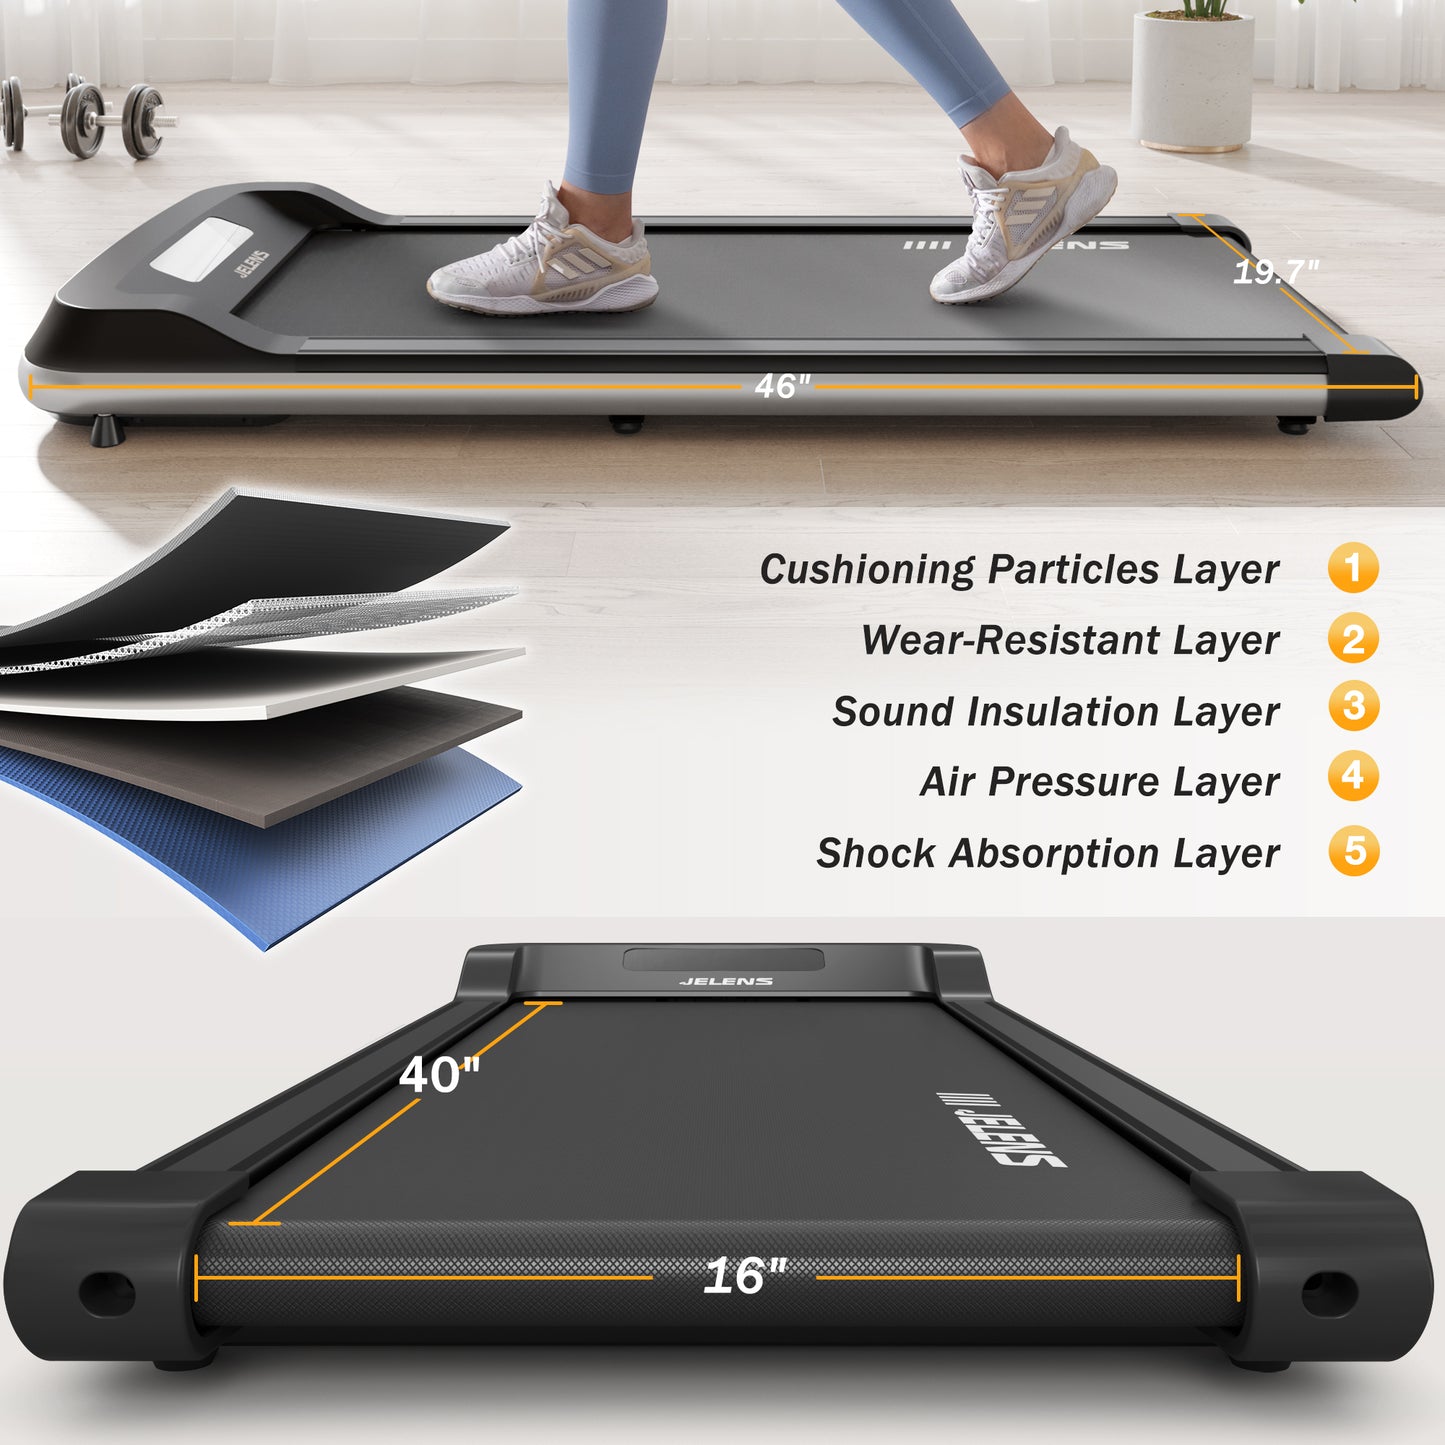 JELENS Walking Pad 2 in 1 Treadmill for Walking and Jogging, Under Desk Treadmill for Home Office with Remote Control, 2.5HP Portable Walking Pad Treadmill, Desk Treadmill in LED Display